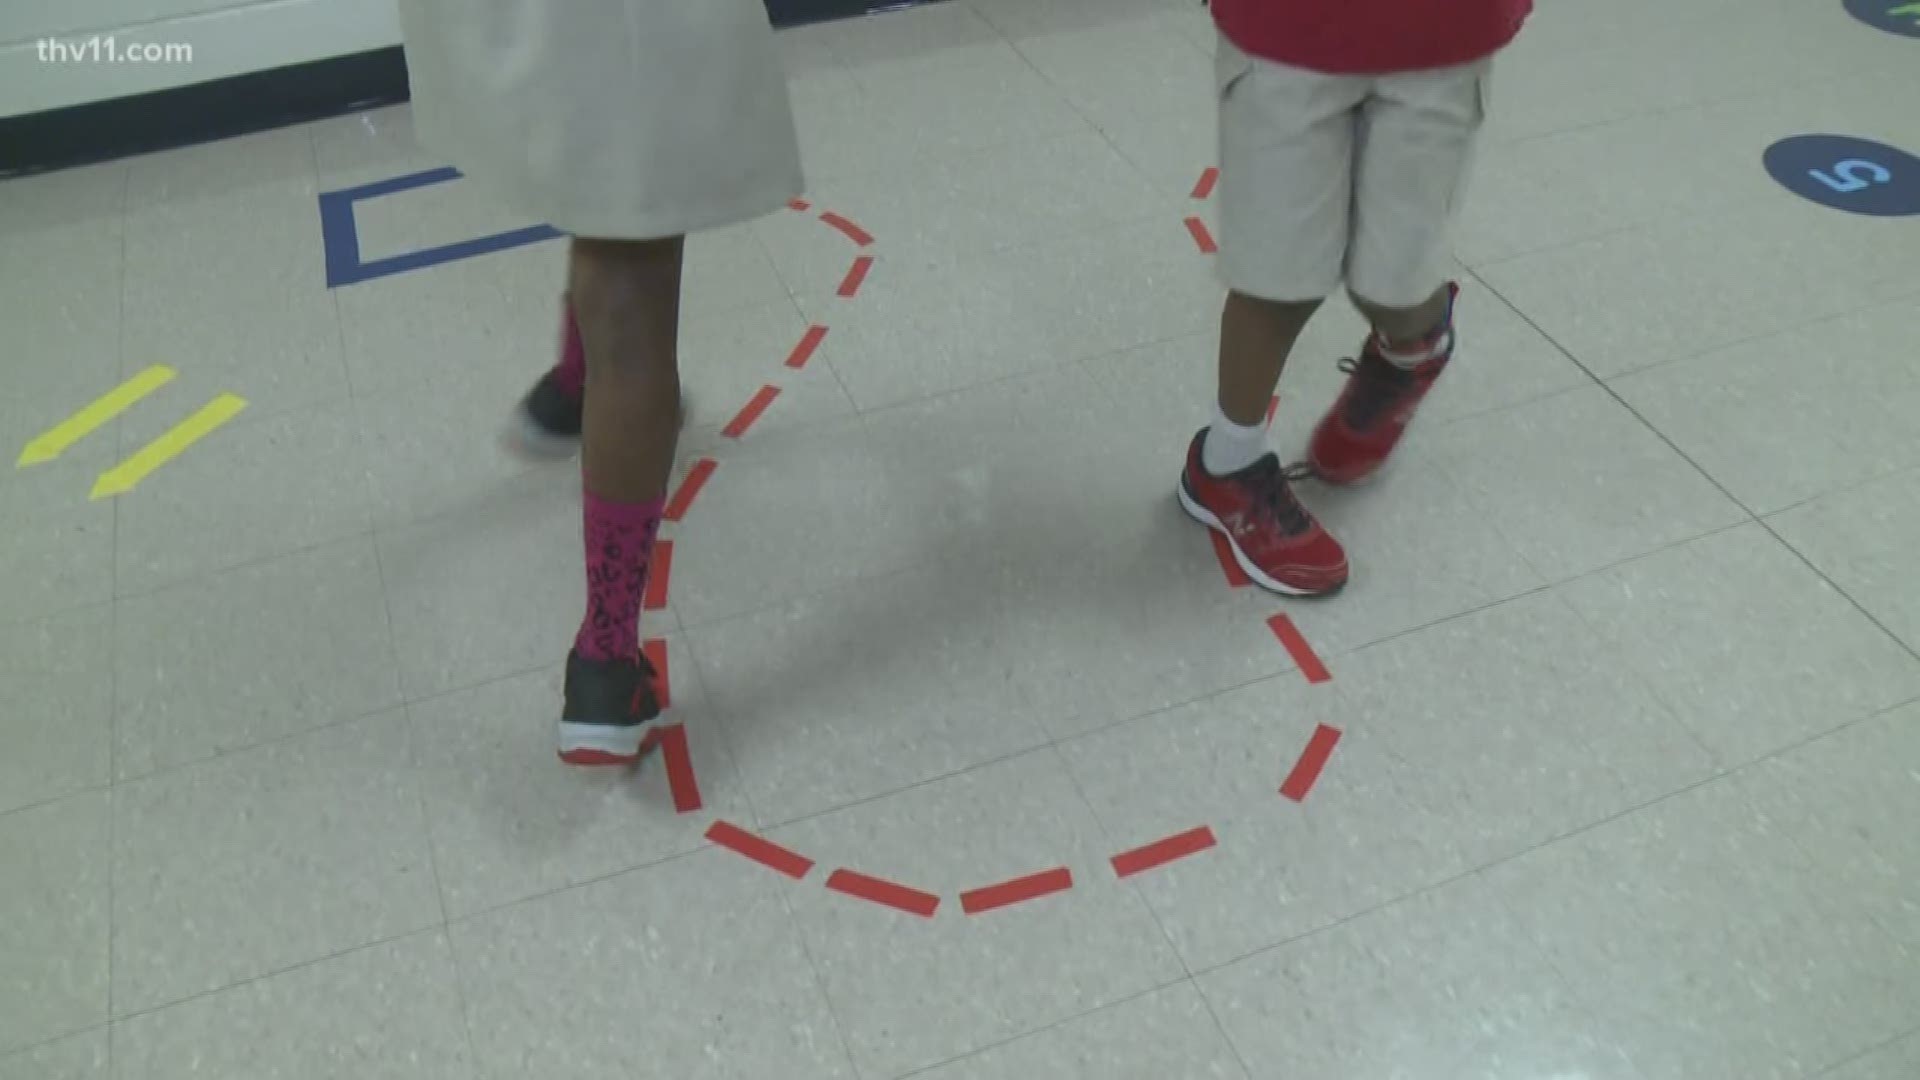 Students at Clinton Elementary School in Sherwood have a new resource to teach kids through movement.